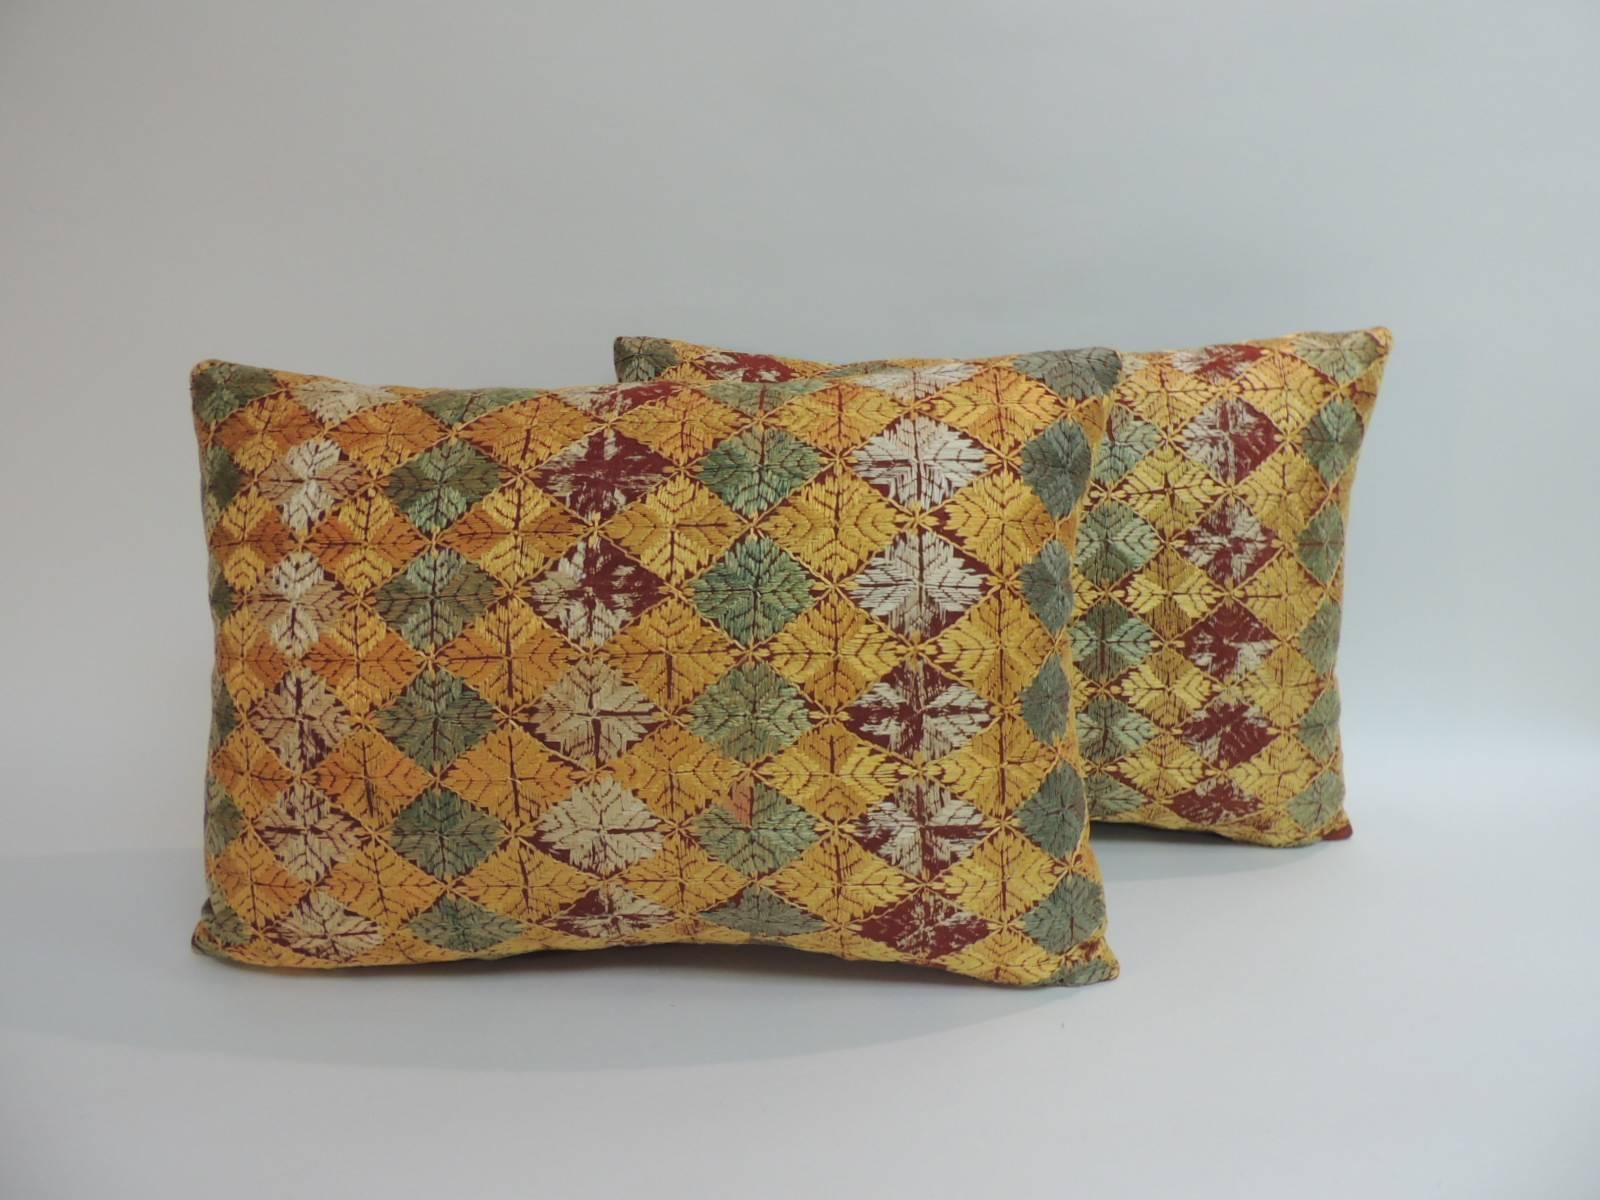 Diamond pattern in the front in shades of yellow, green and gold.
Silk threads on cotton with a moss green linen backings.
Decorative pillow handcrafted and designed in the USA. 
Closure by stitch (no zipper closure) with a custom-made pillow